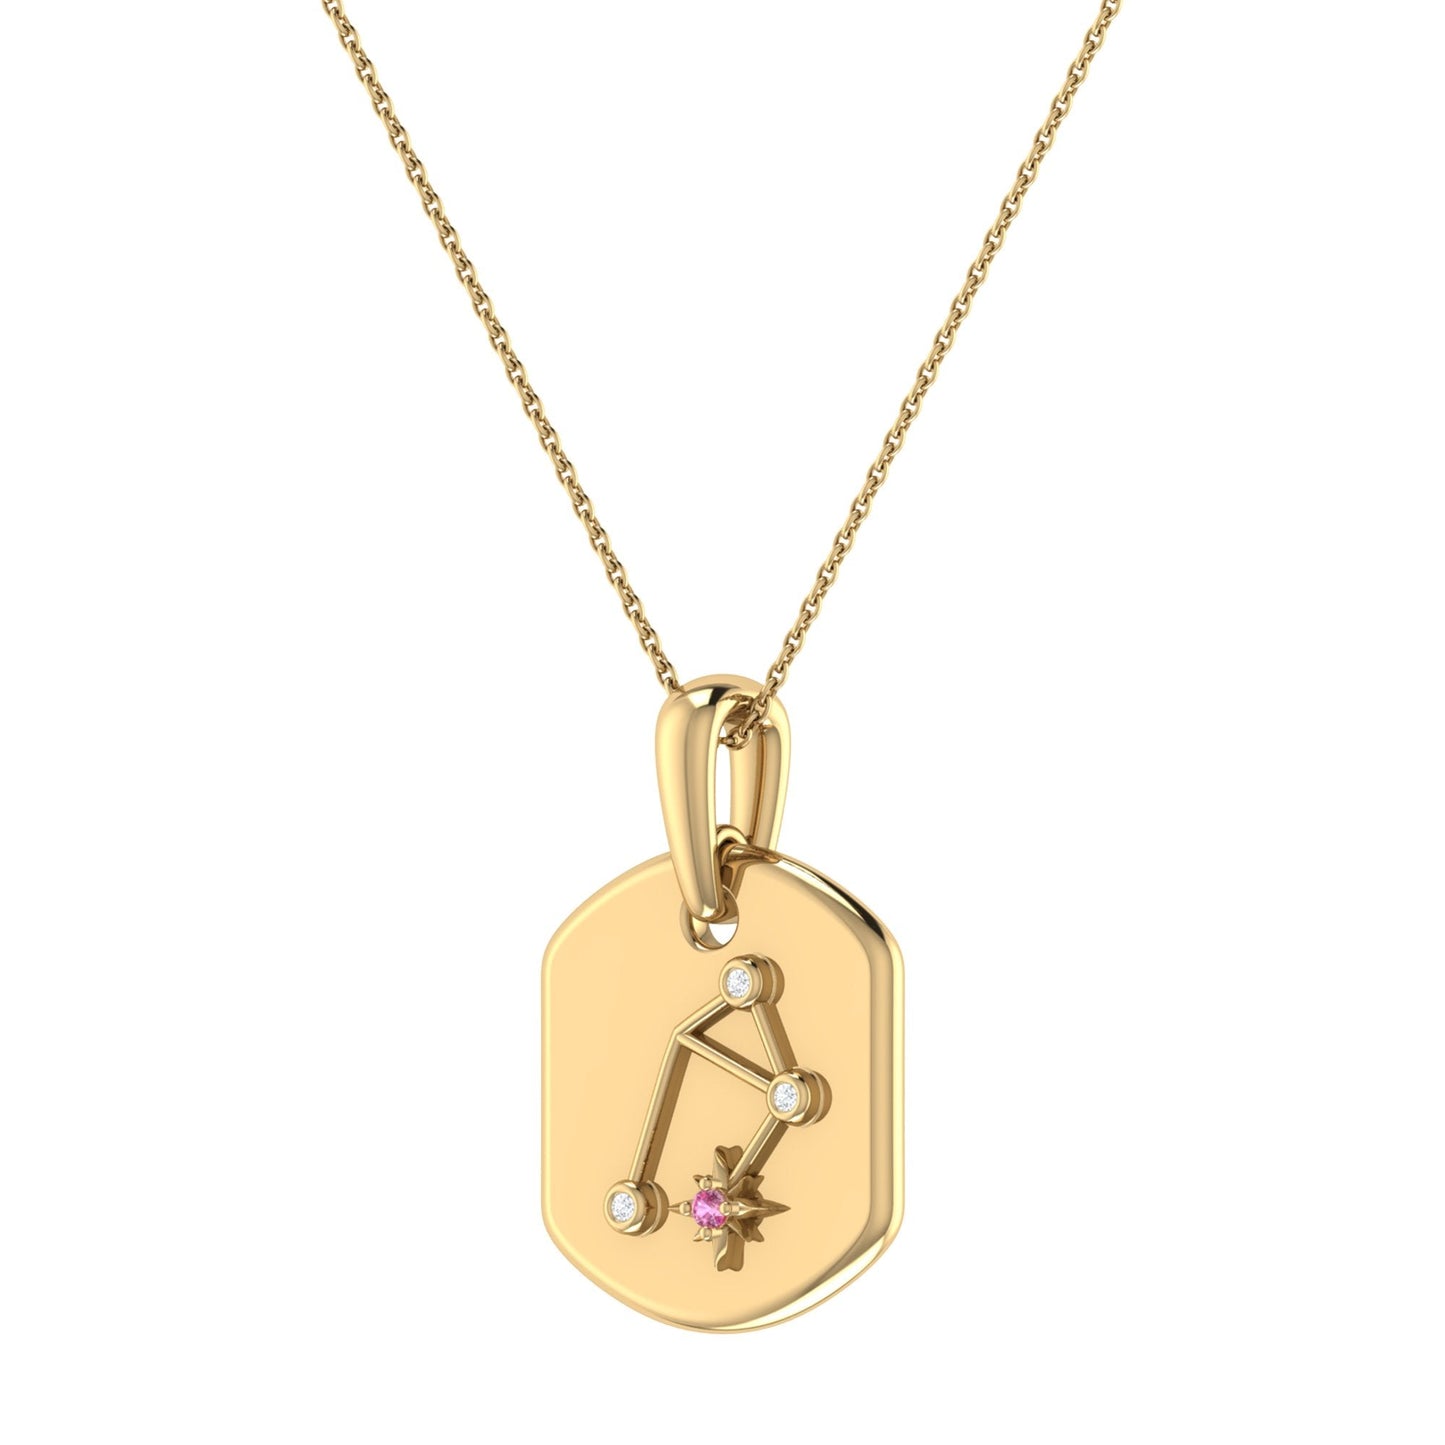 Libra Scales Pink Tourmaline & Diamond Constellation Tag Pendant Necklace in 14K Yellow Gold Vermeil on Sterling Silver by LuvMyJewelry